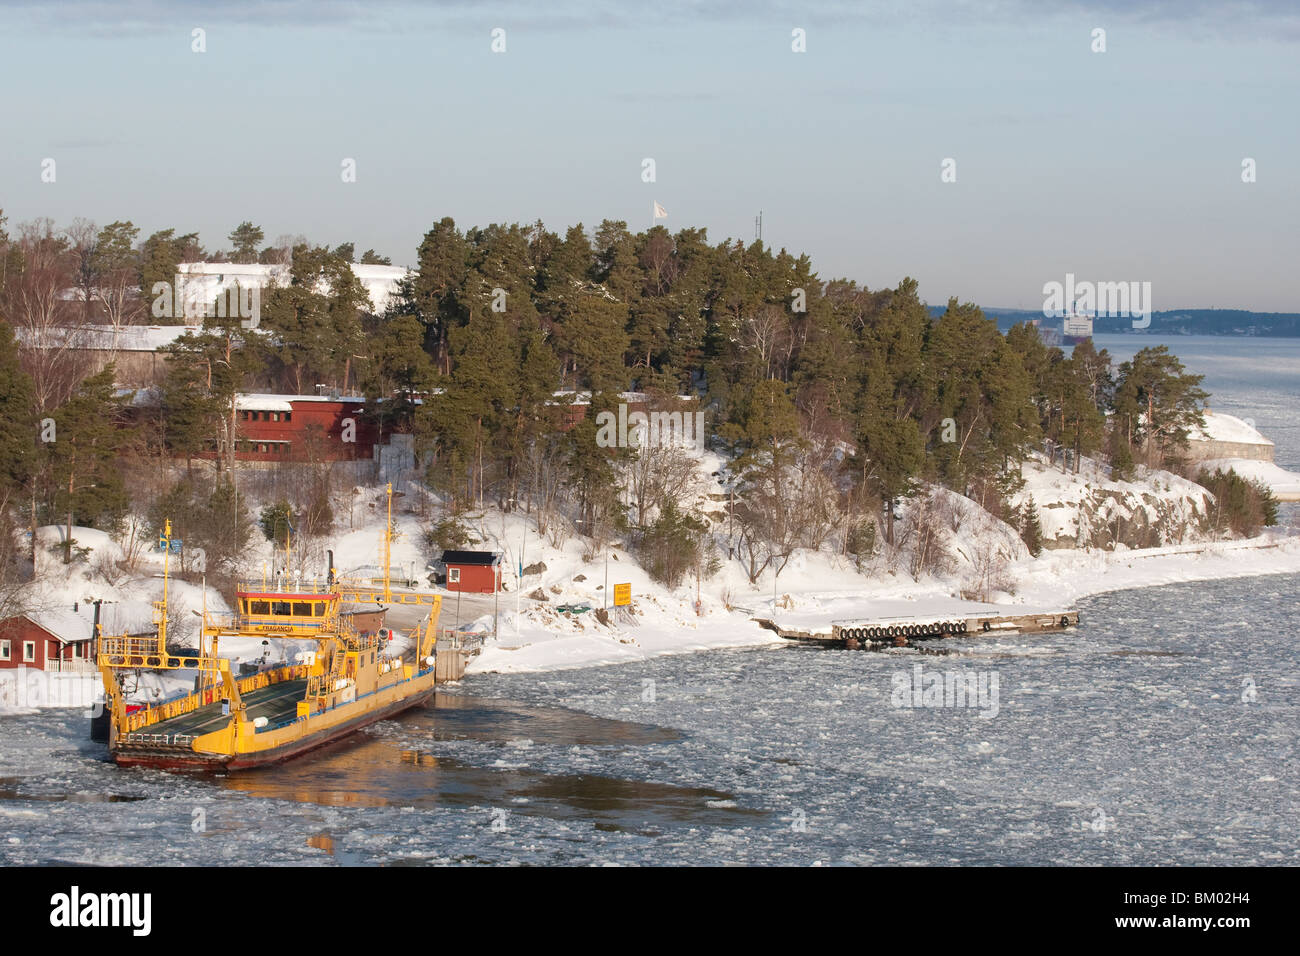 A small carferry at the Oxdjupet in the outer Stockholm archipelago. Stock Photo